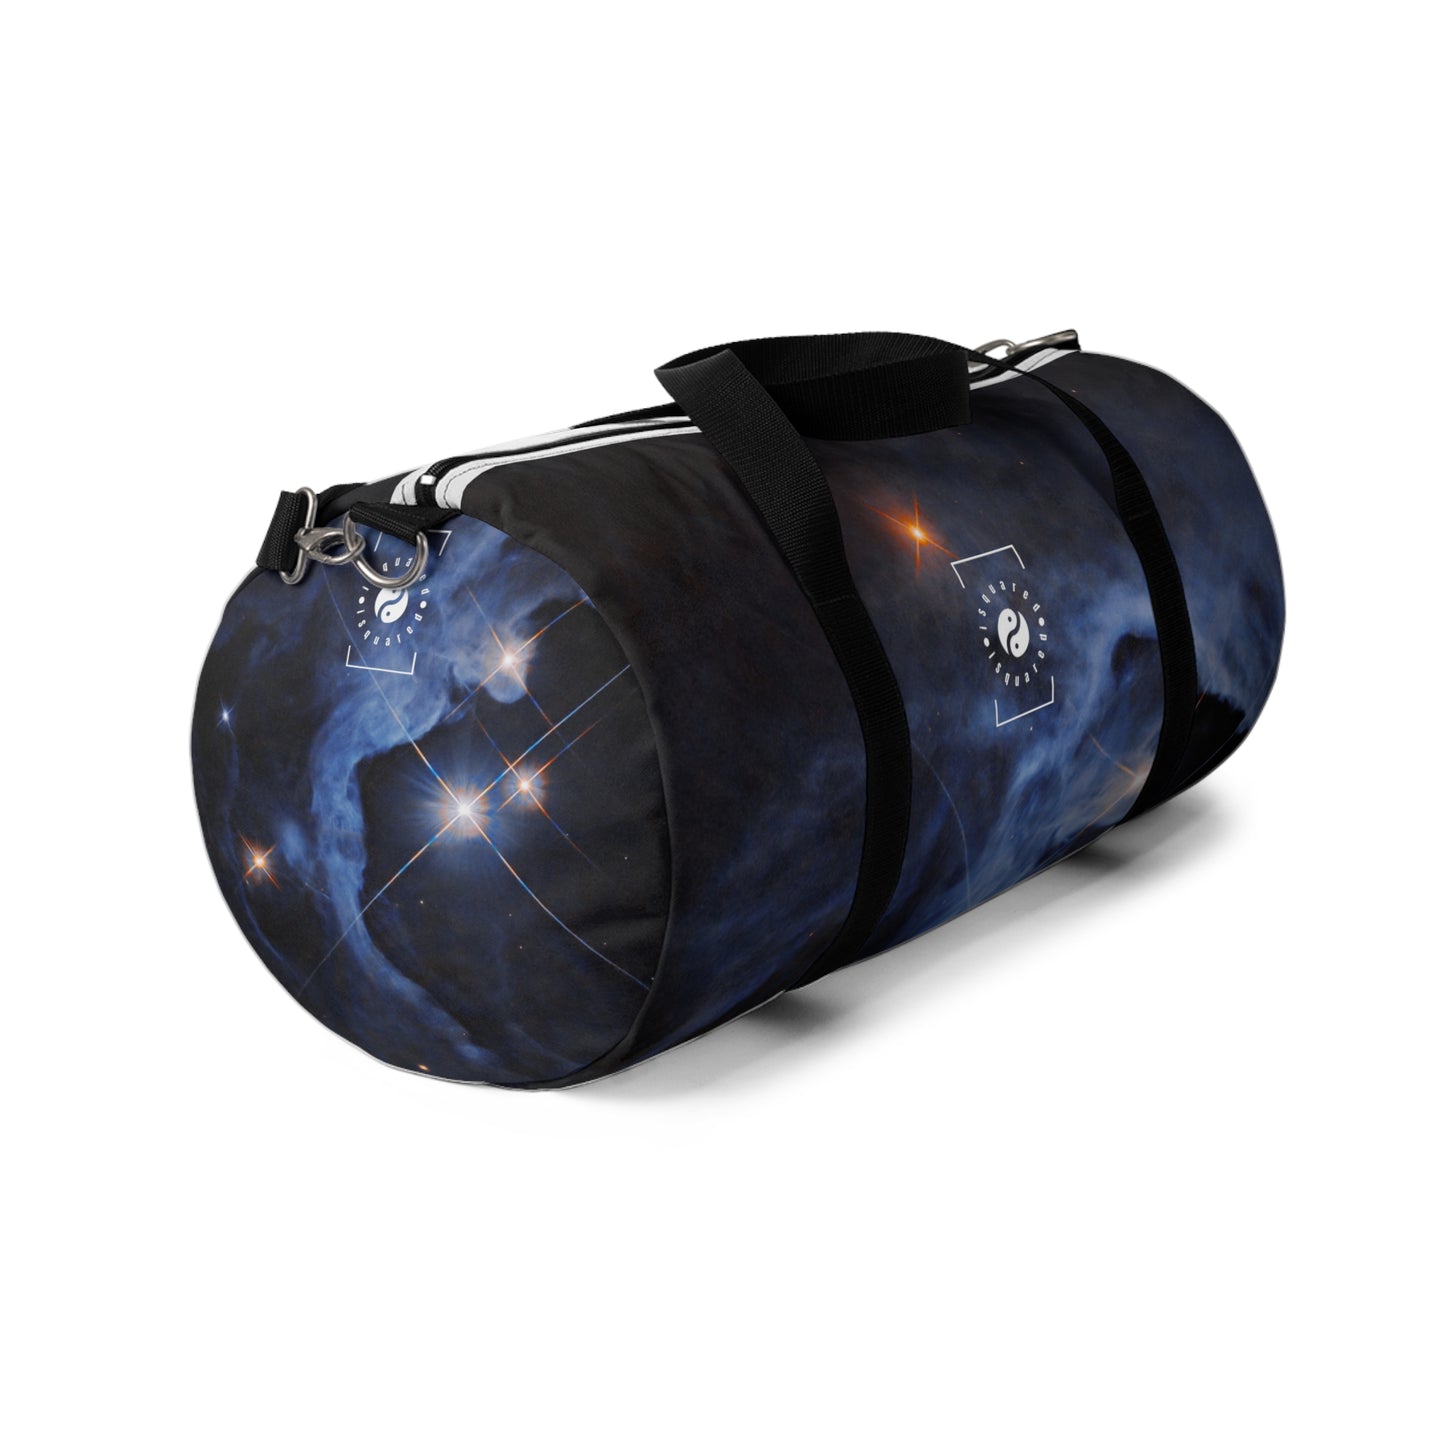 HP Tau, HP Tau G2, and G3 3 star system captured by Hubble - Duffle Bag